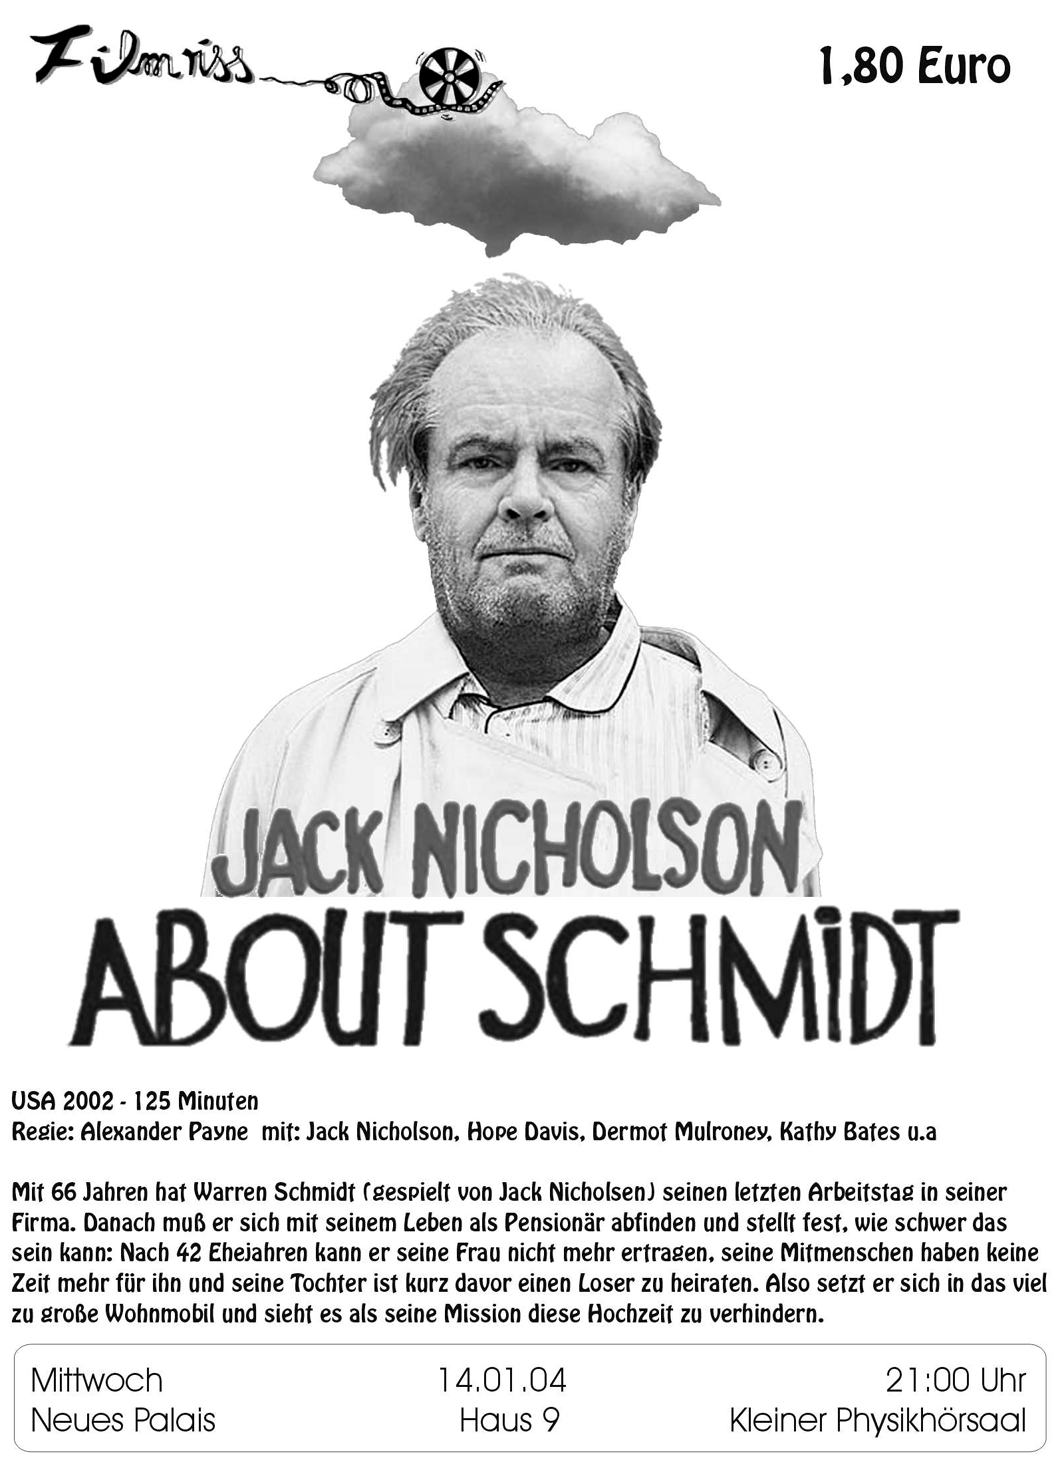 [about-schmidt.gif]